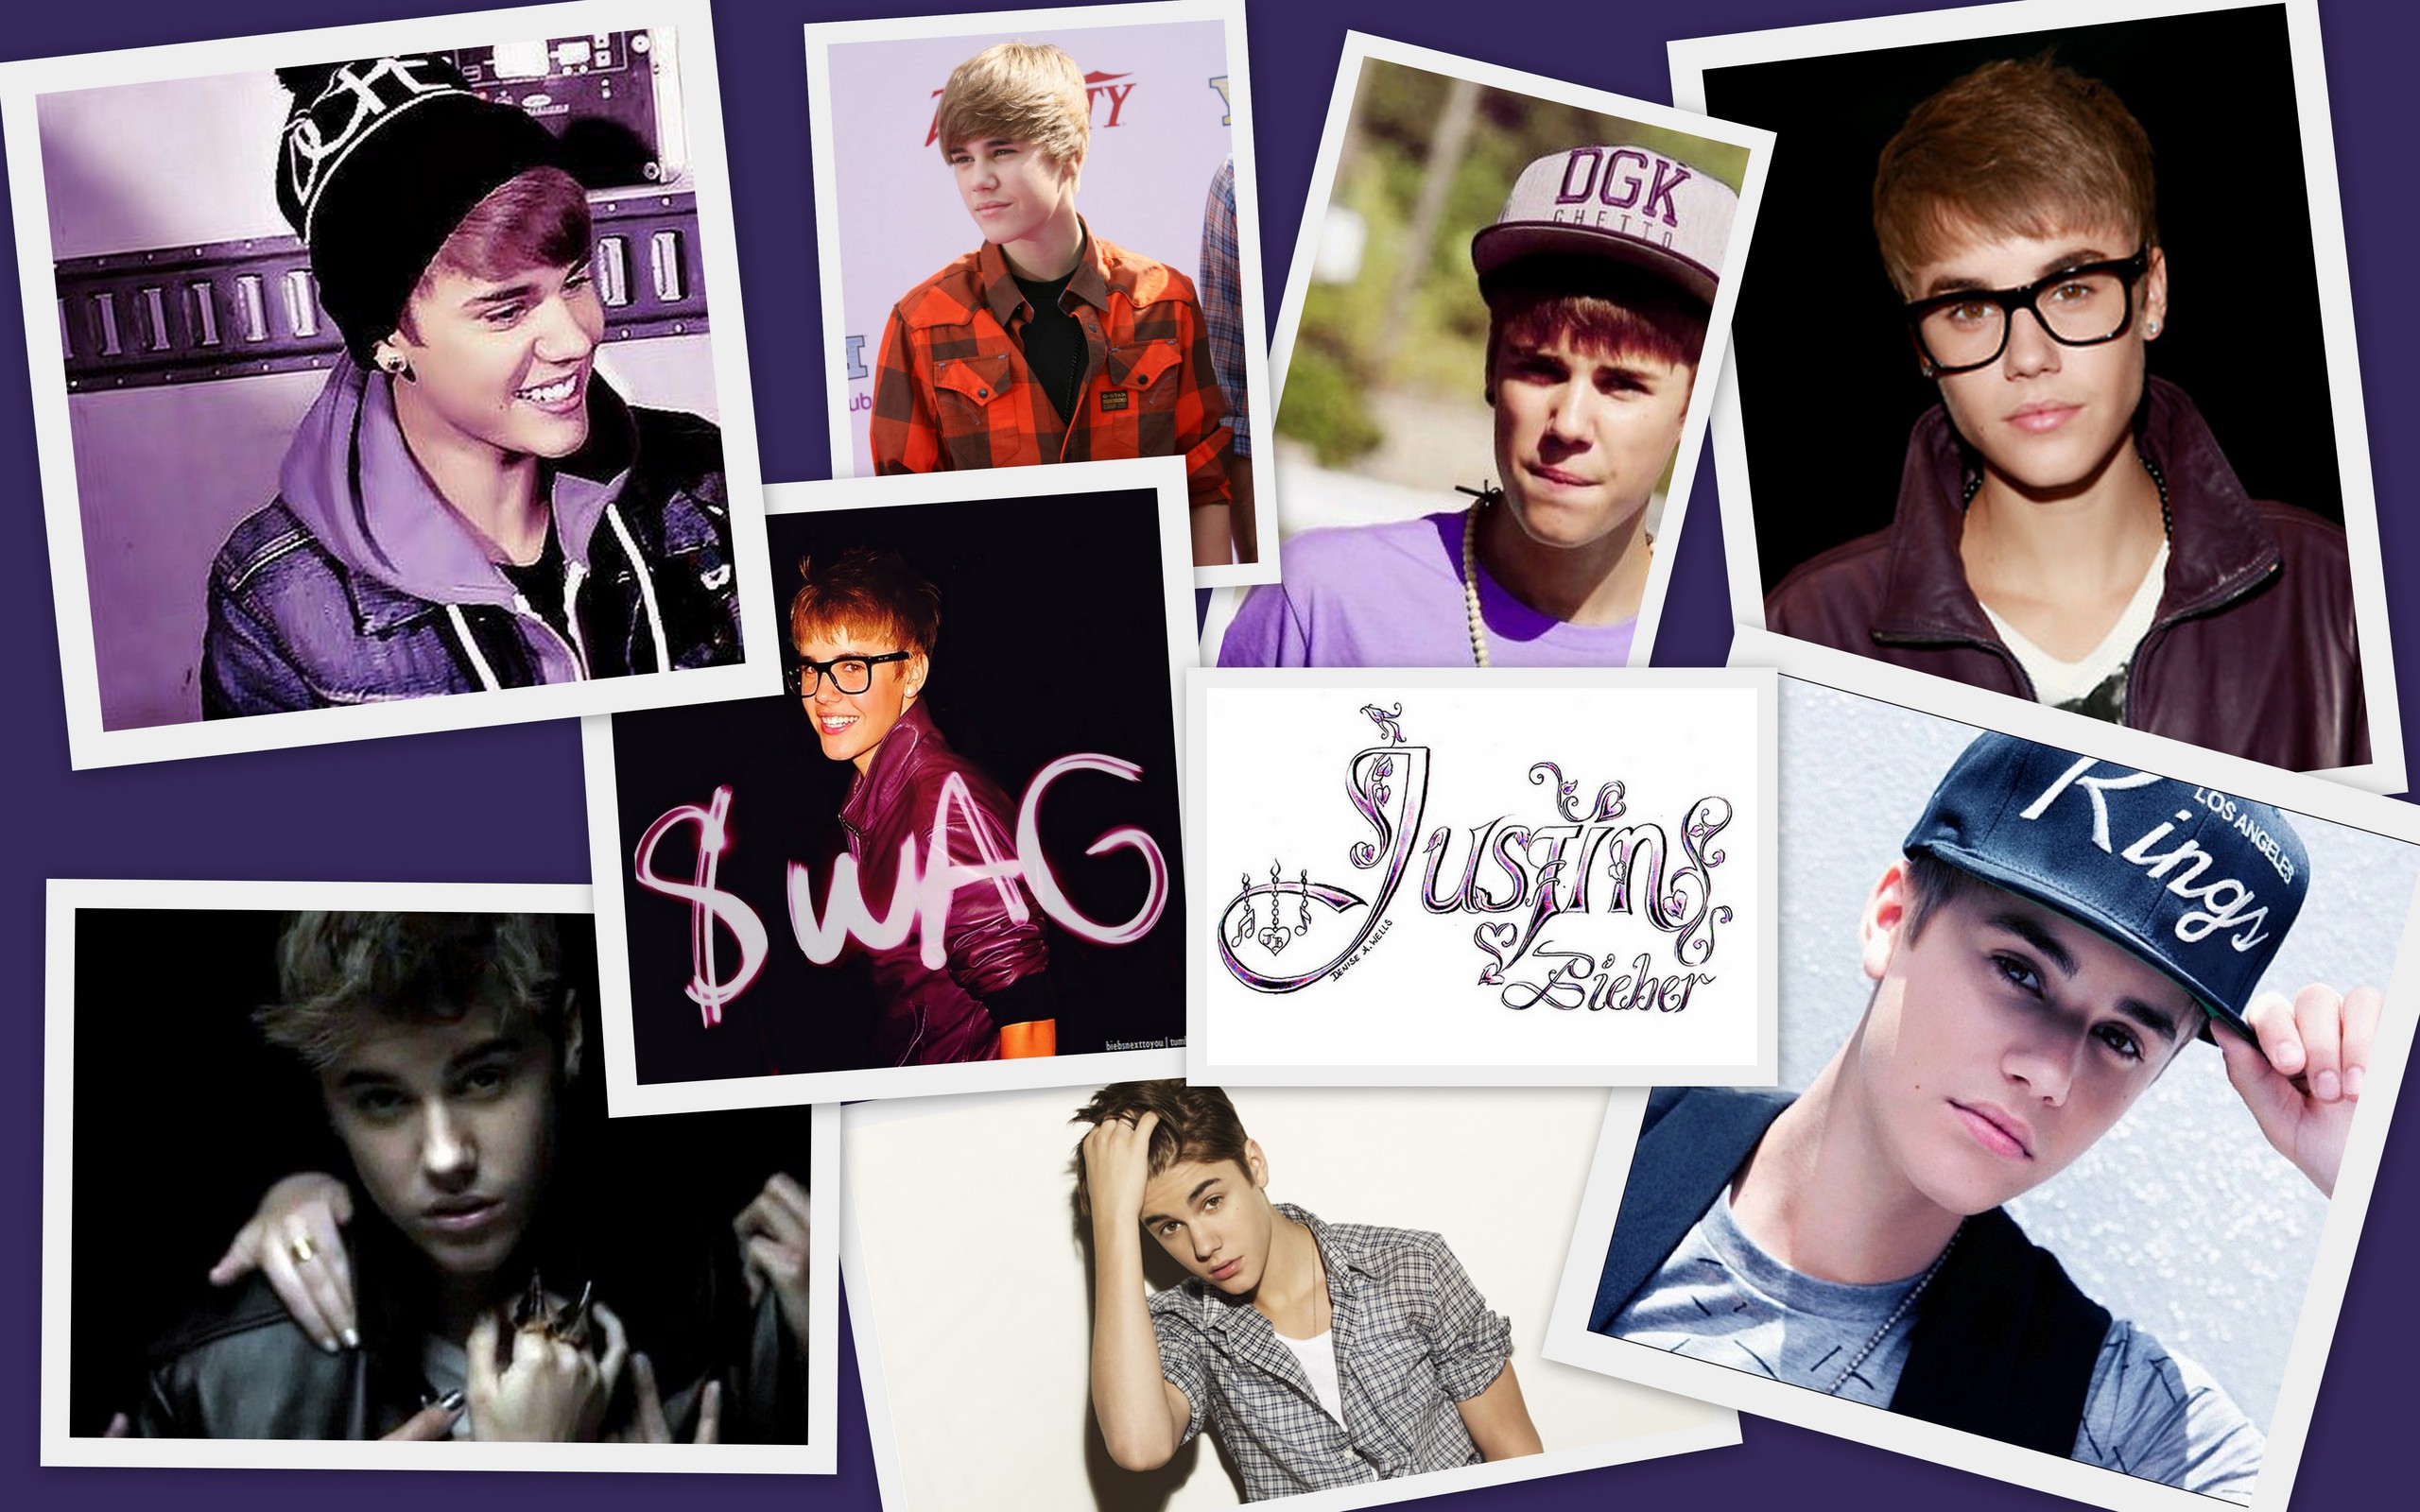 Justin Bieber Collage Wallpapers